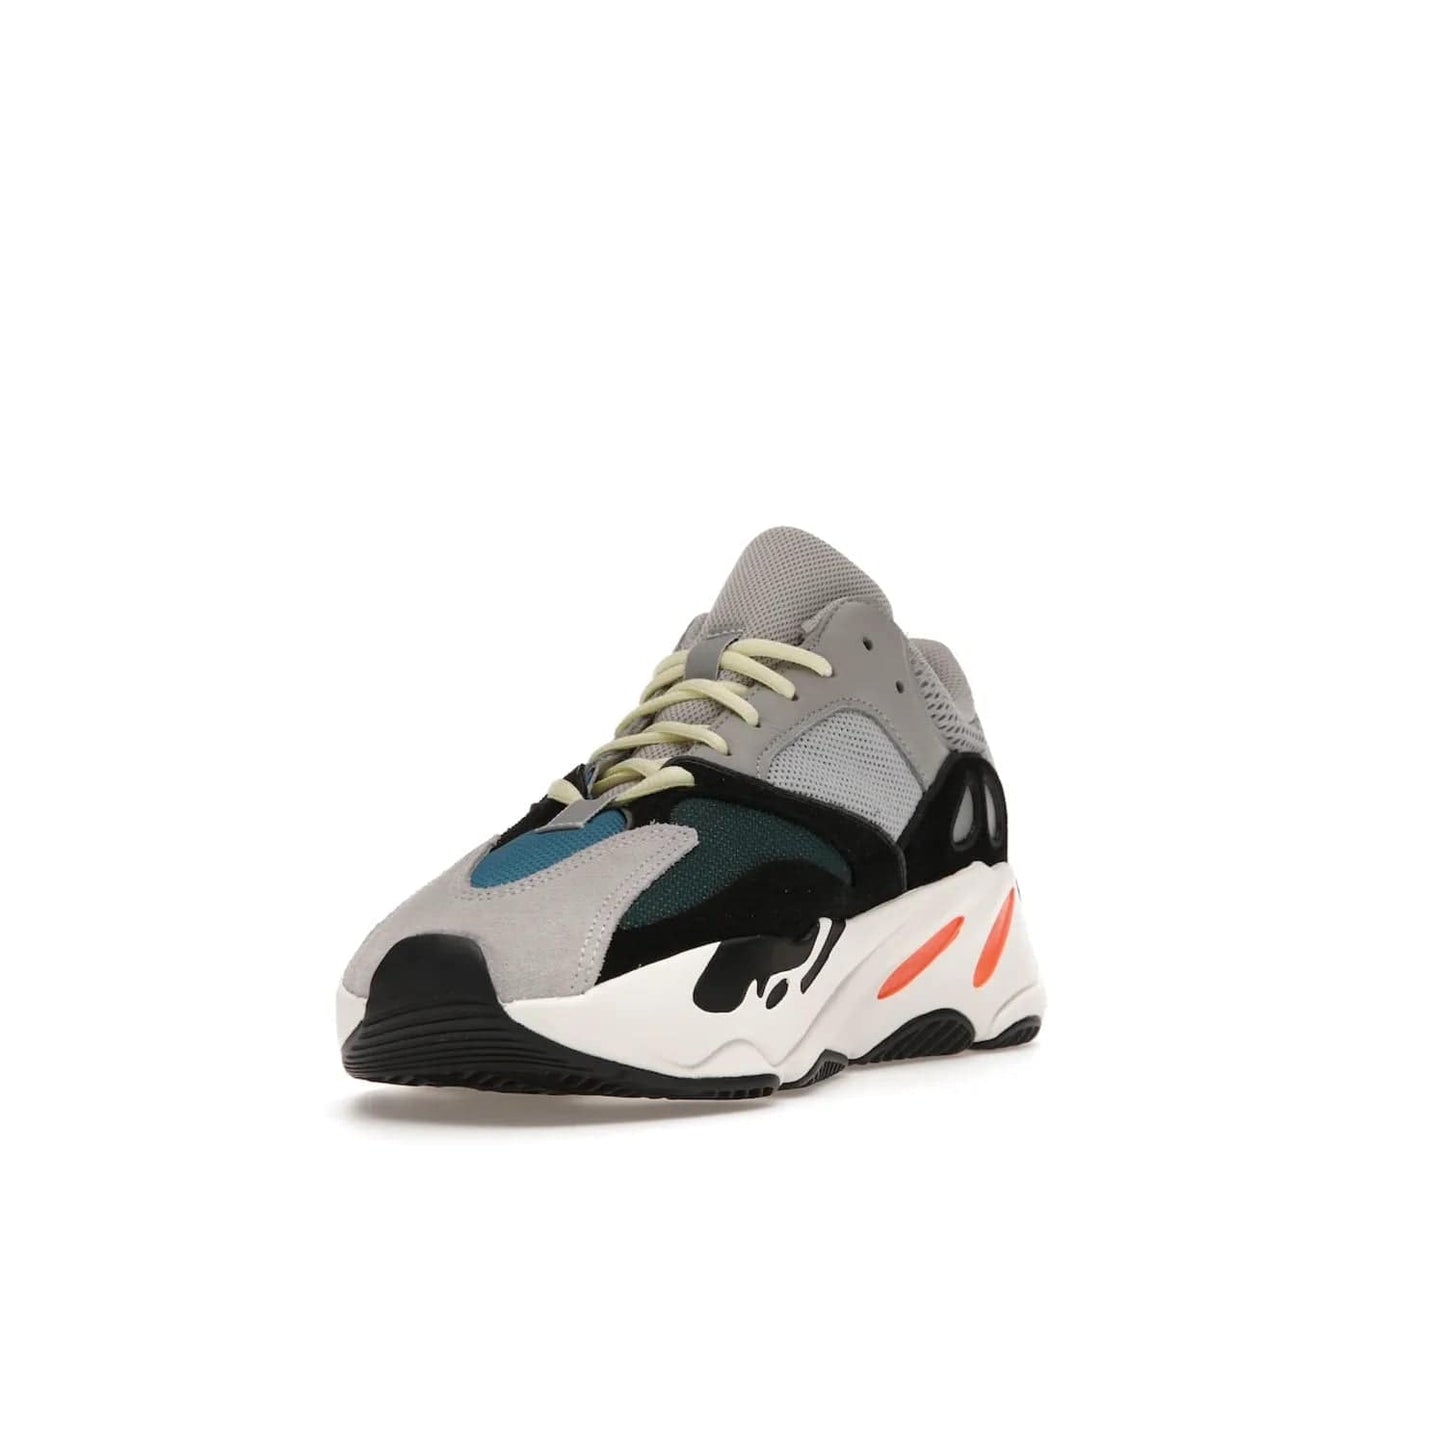 adidas Yeezy Boost 700 Wave Runner - Image 13 - Only at www.BallersClubKickz.com - Shop the iconic adidas Yeezy Boost 700 Wave Runner. Featuring grey mesh and leather upper, black suede overlays, teal mesh underlays, and signature Boost sole. Be bold & make a statement.